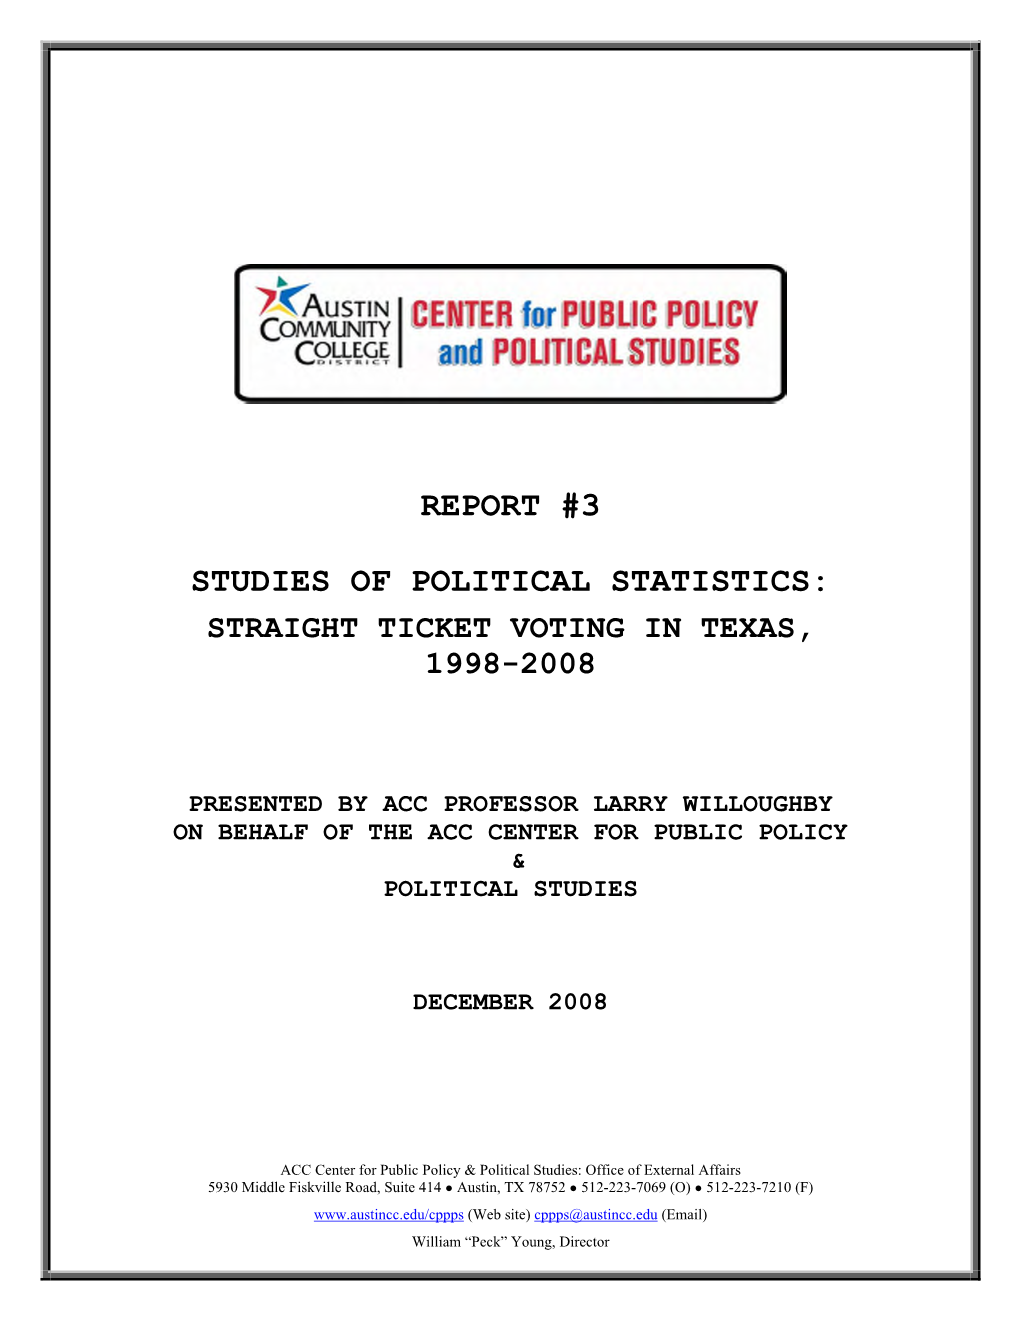 Straight Ticket Voting in Texas, 1998-2008